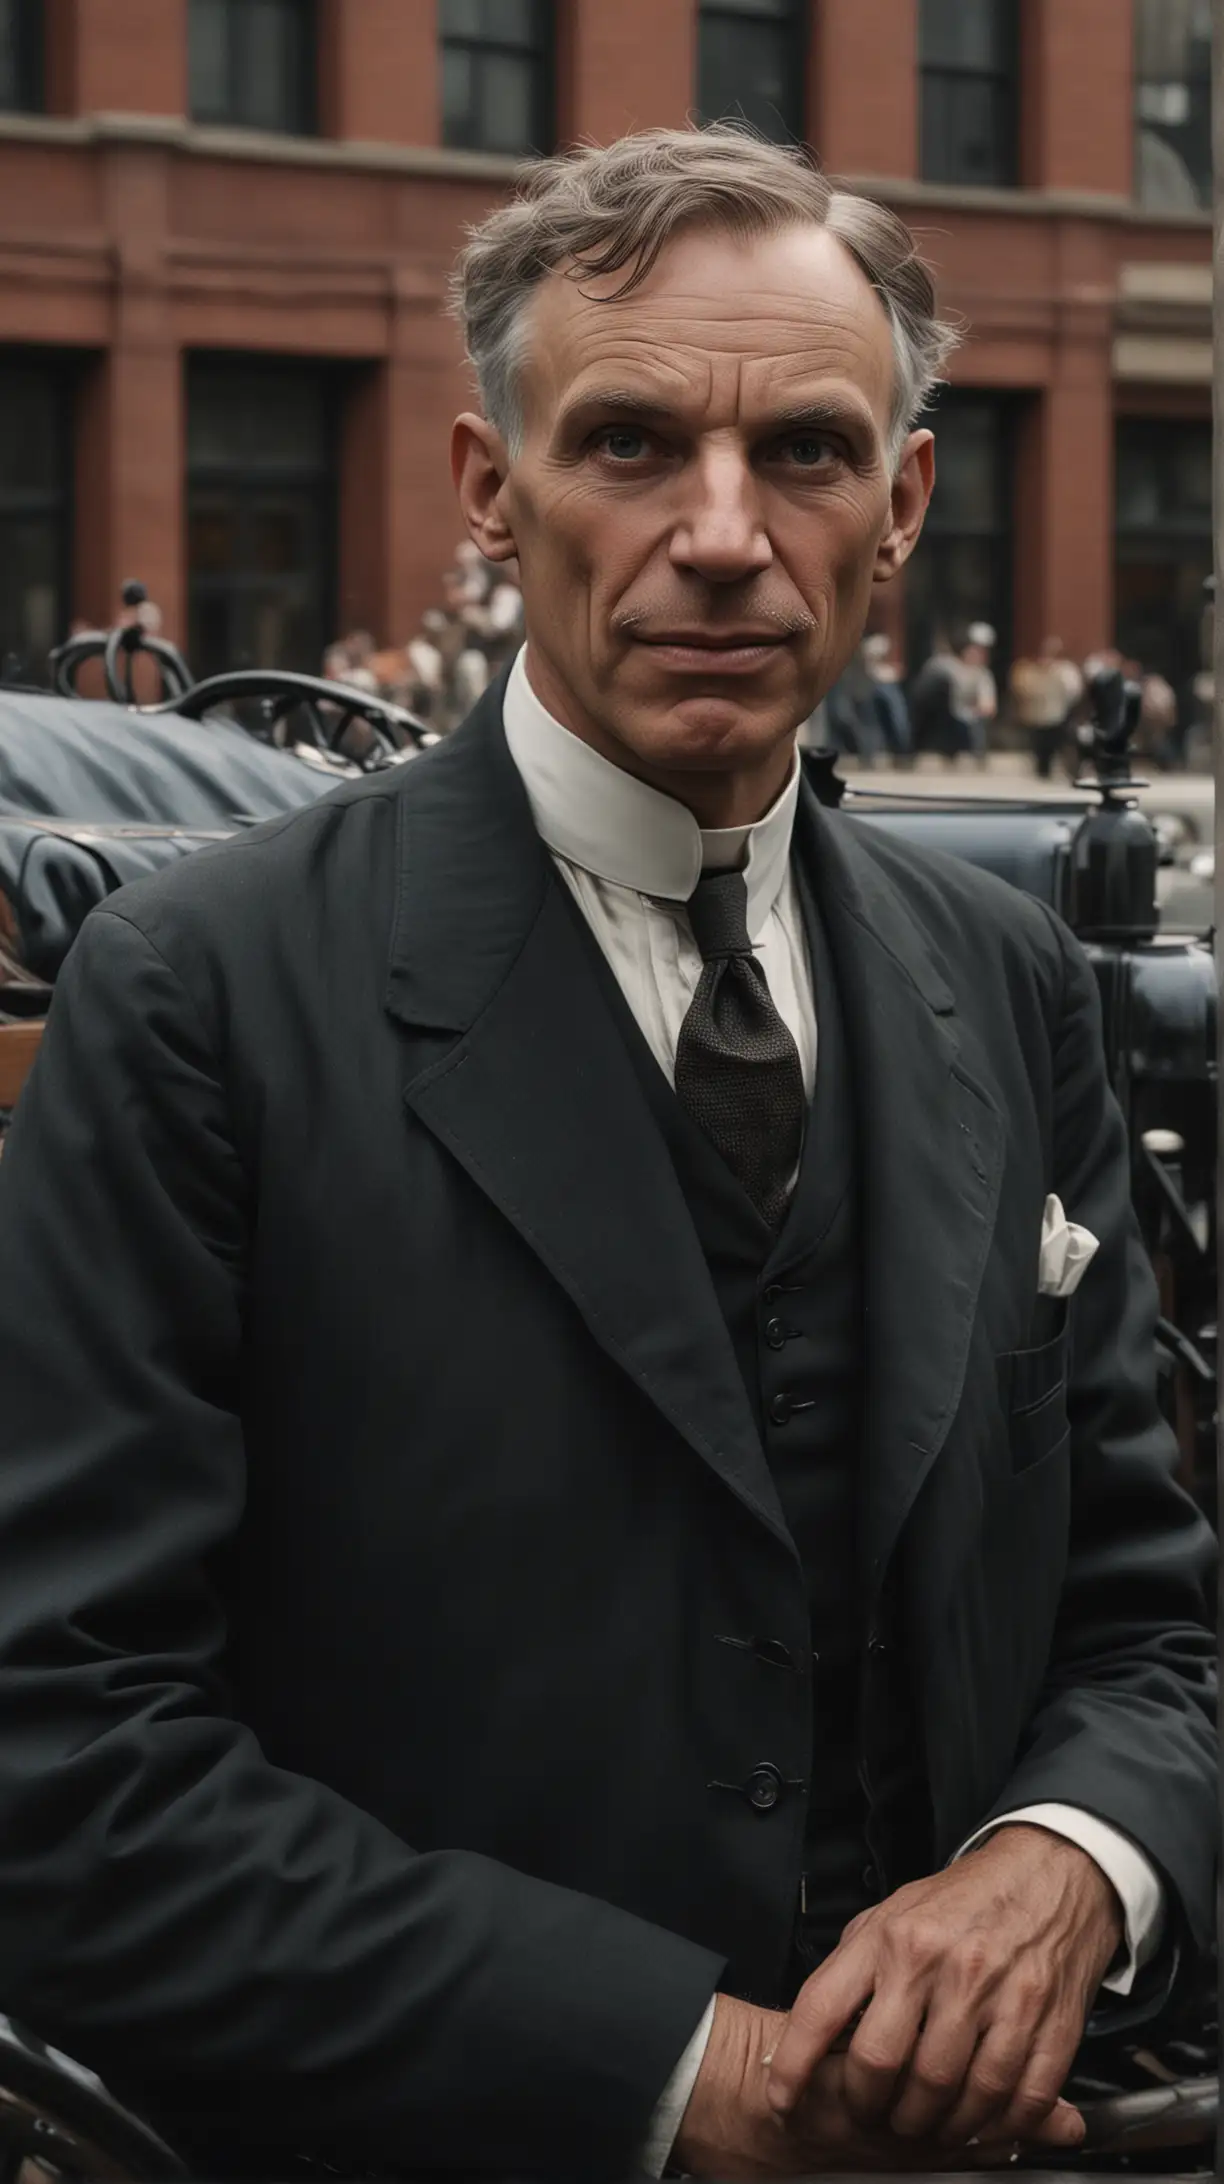 Cinematic and dramatic, realistic portrait.  
Era: 1896

Scene: Henry Ford, In 1896, the founder of Ford Motor Company built his first car and took it for a spin on the streets of Detroit.